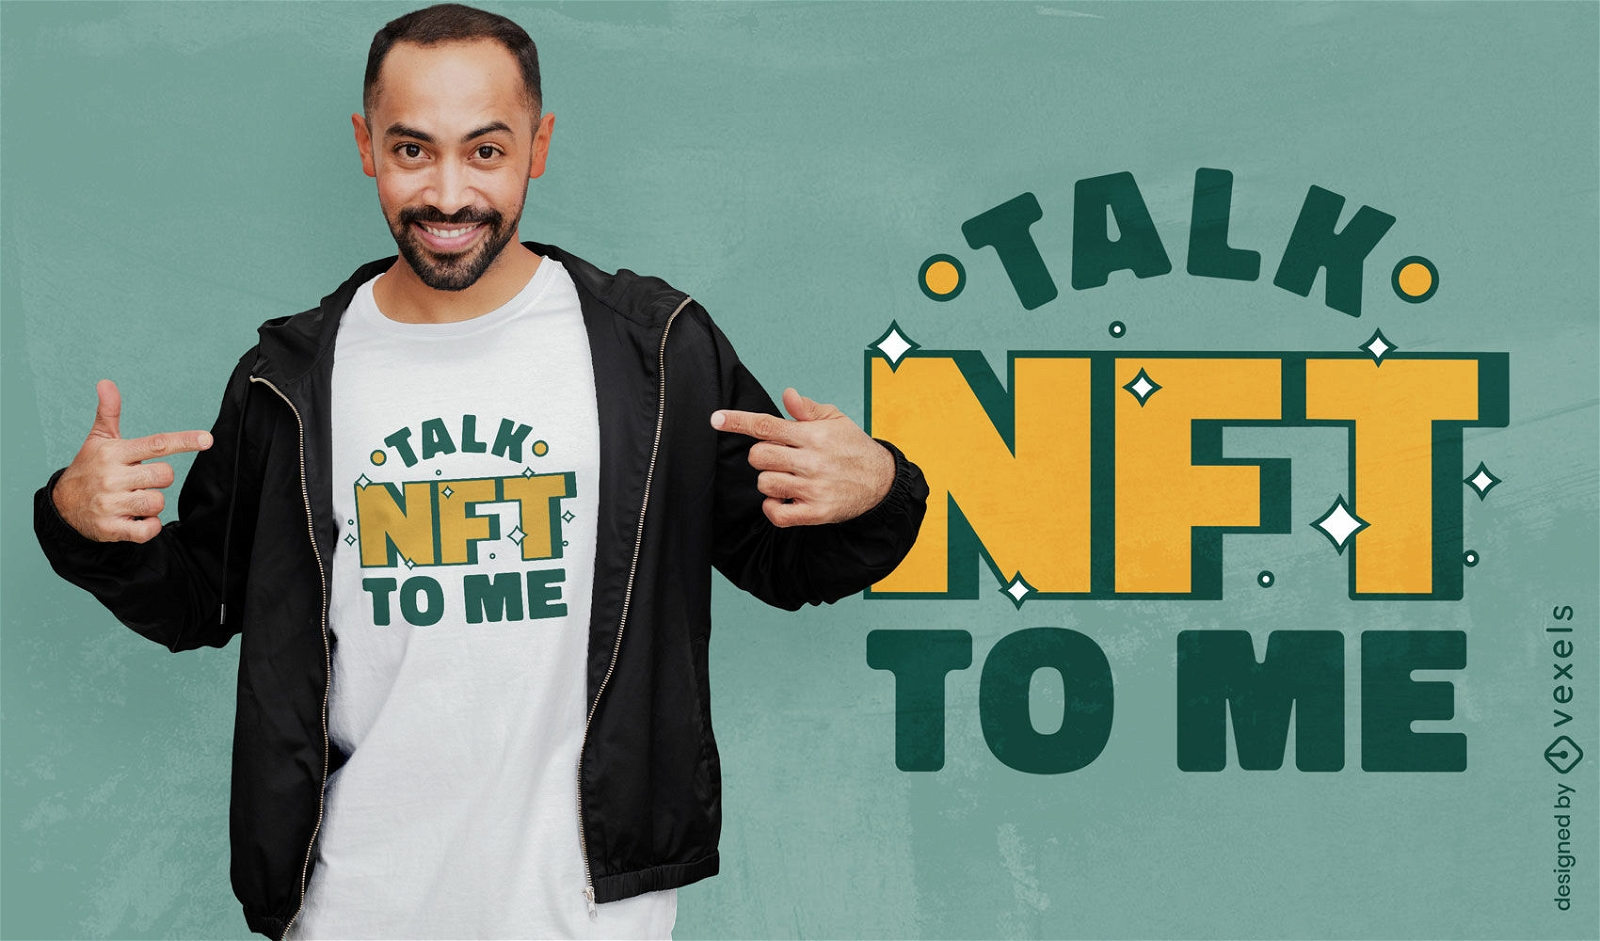 Talk NFT to me quote t-shirt design